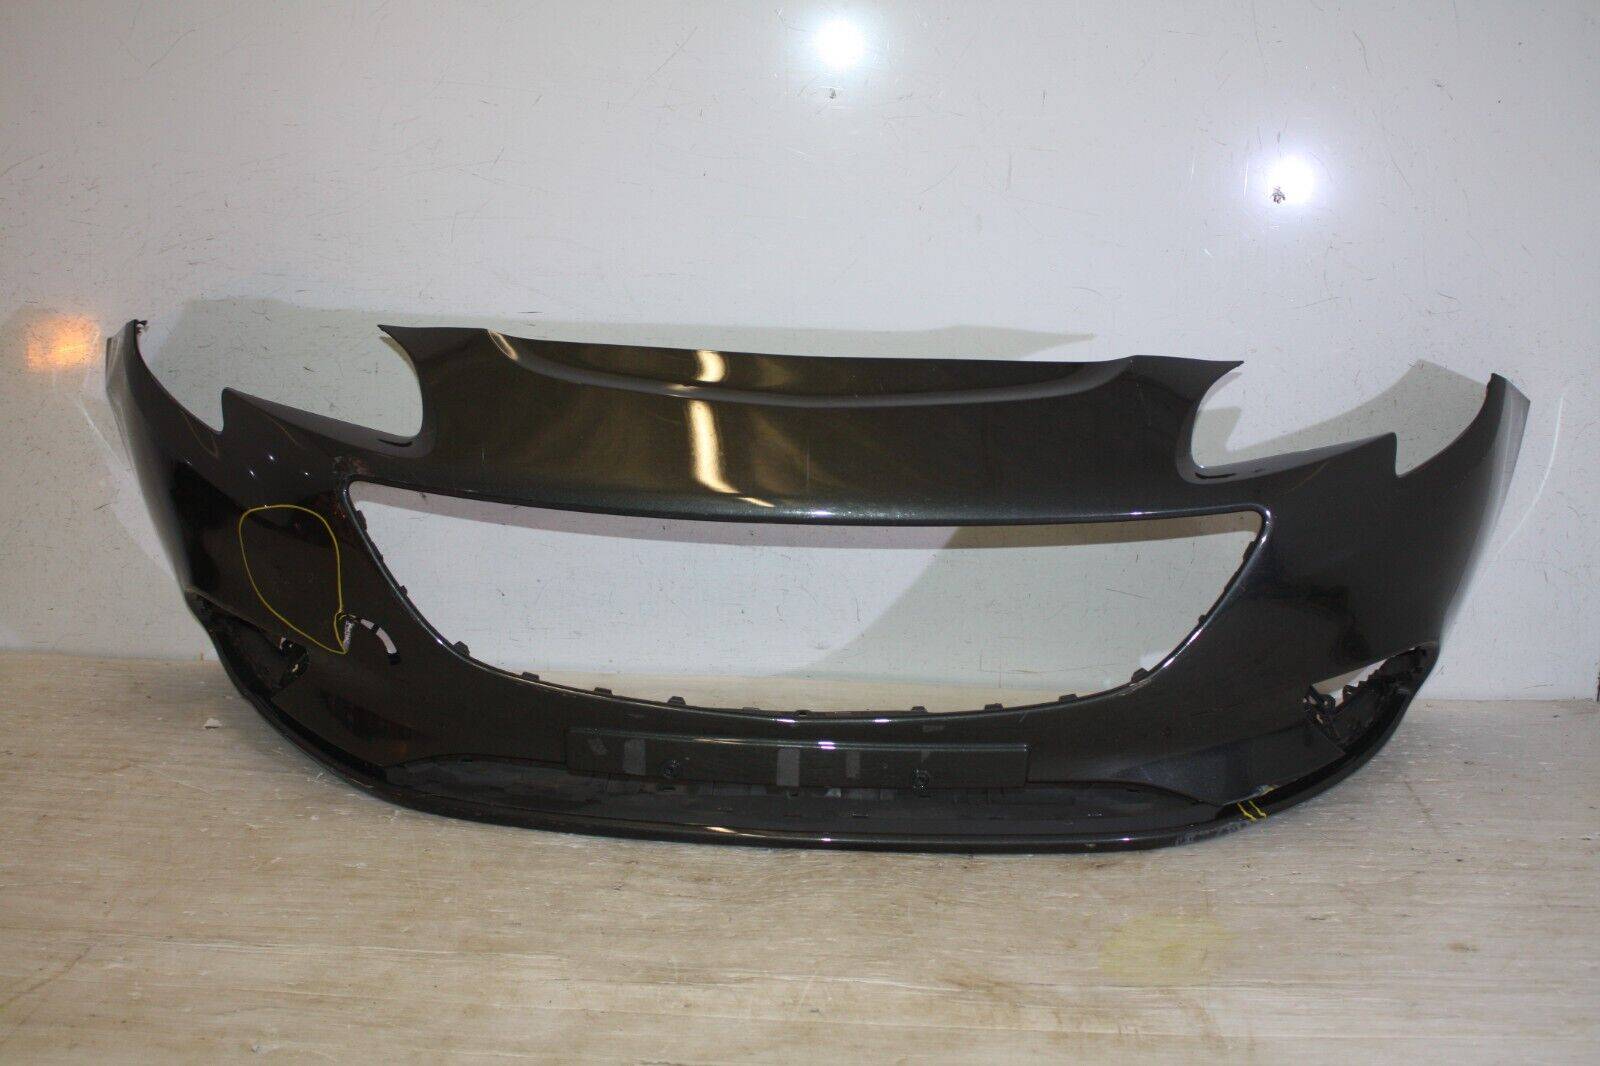 Vauxhall Corsa F Front Bumper 2015 TO 2020 39003567 Genuine SEE PICS 176157875515